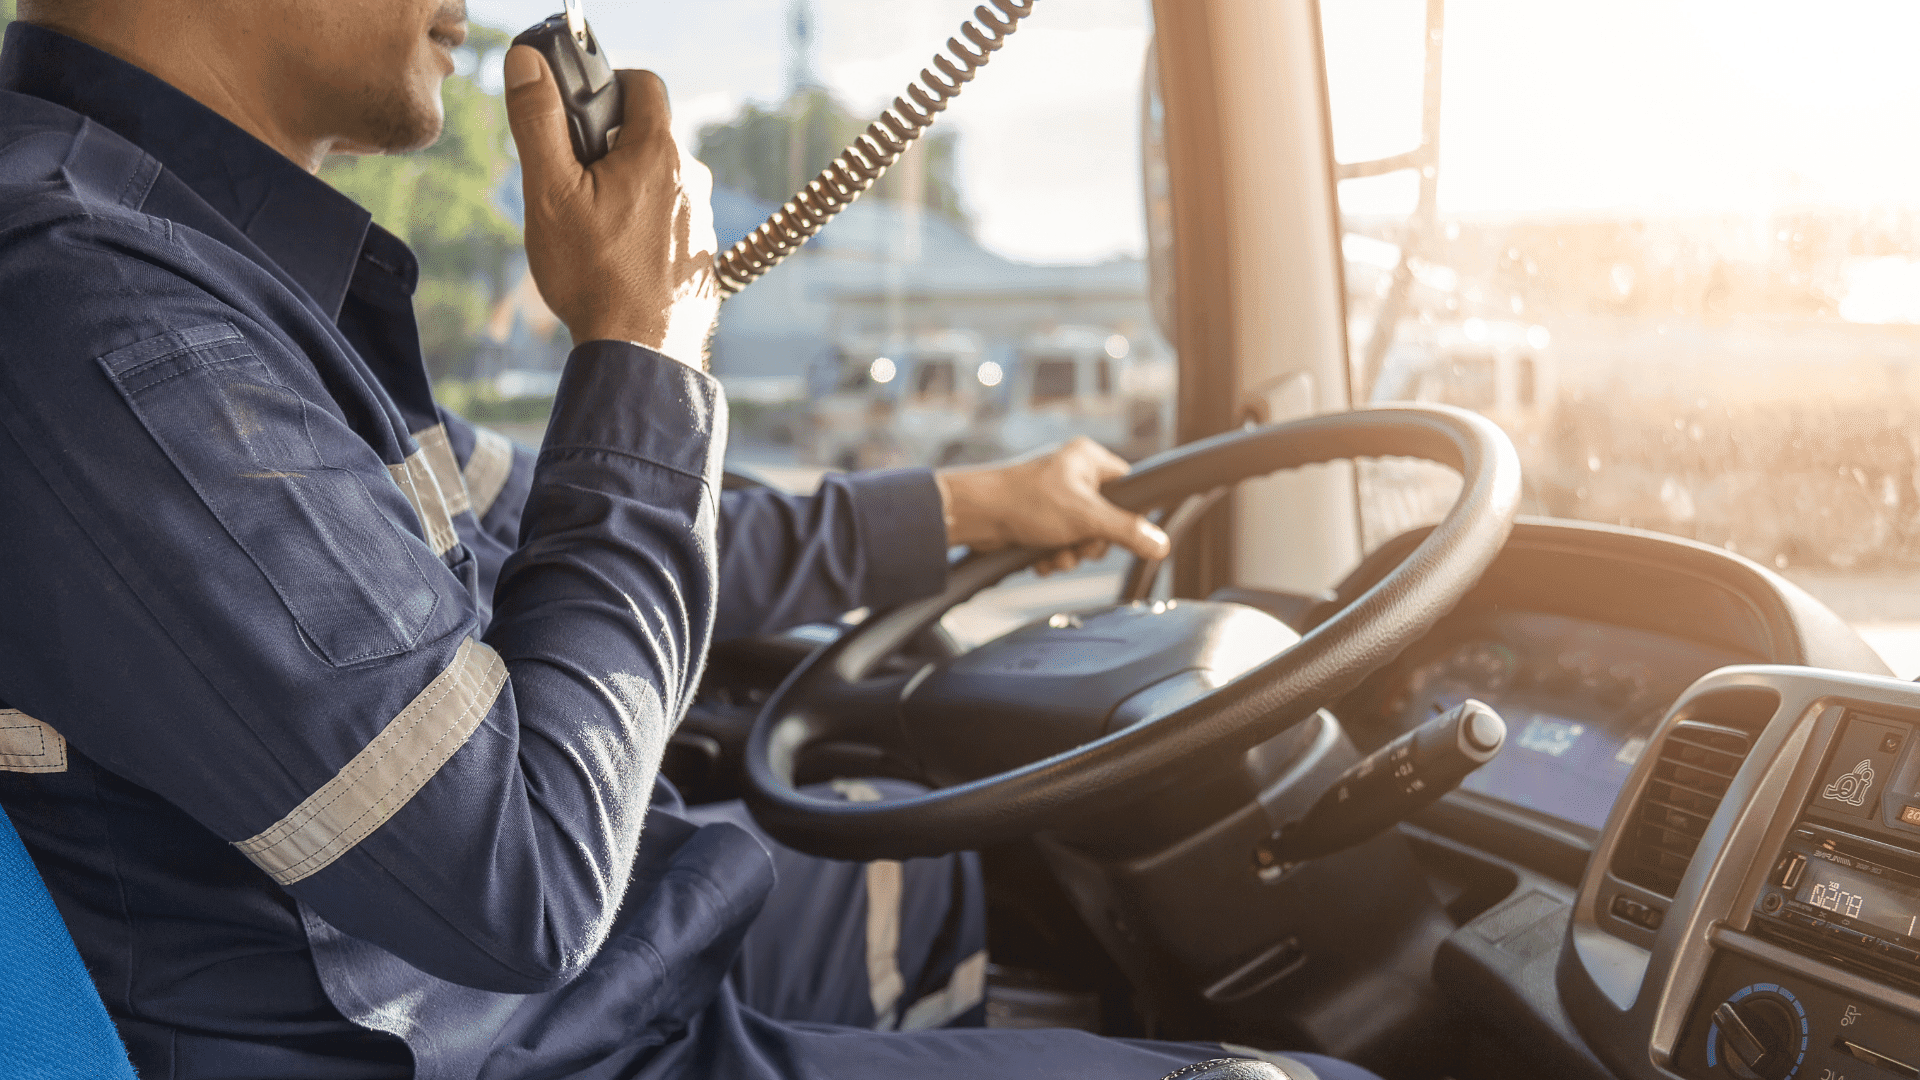 12 Essentials Every Truck Driver Should Have In Their Truck